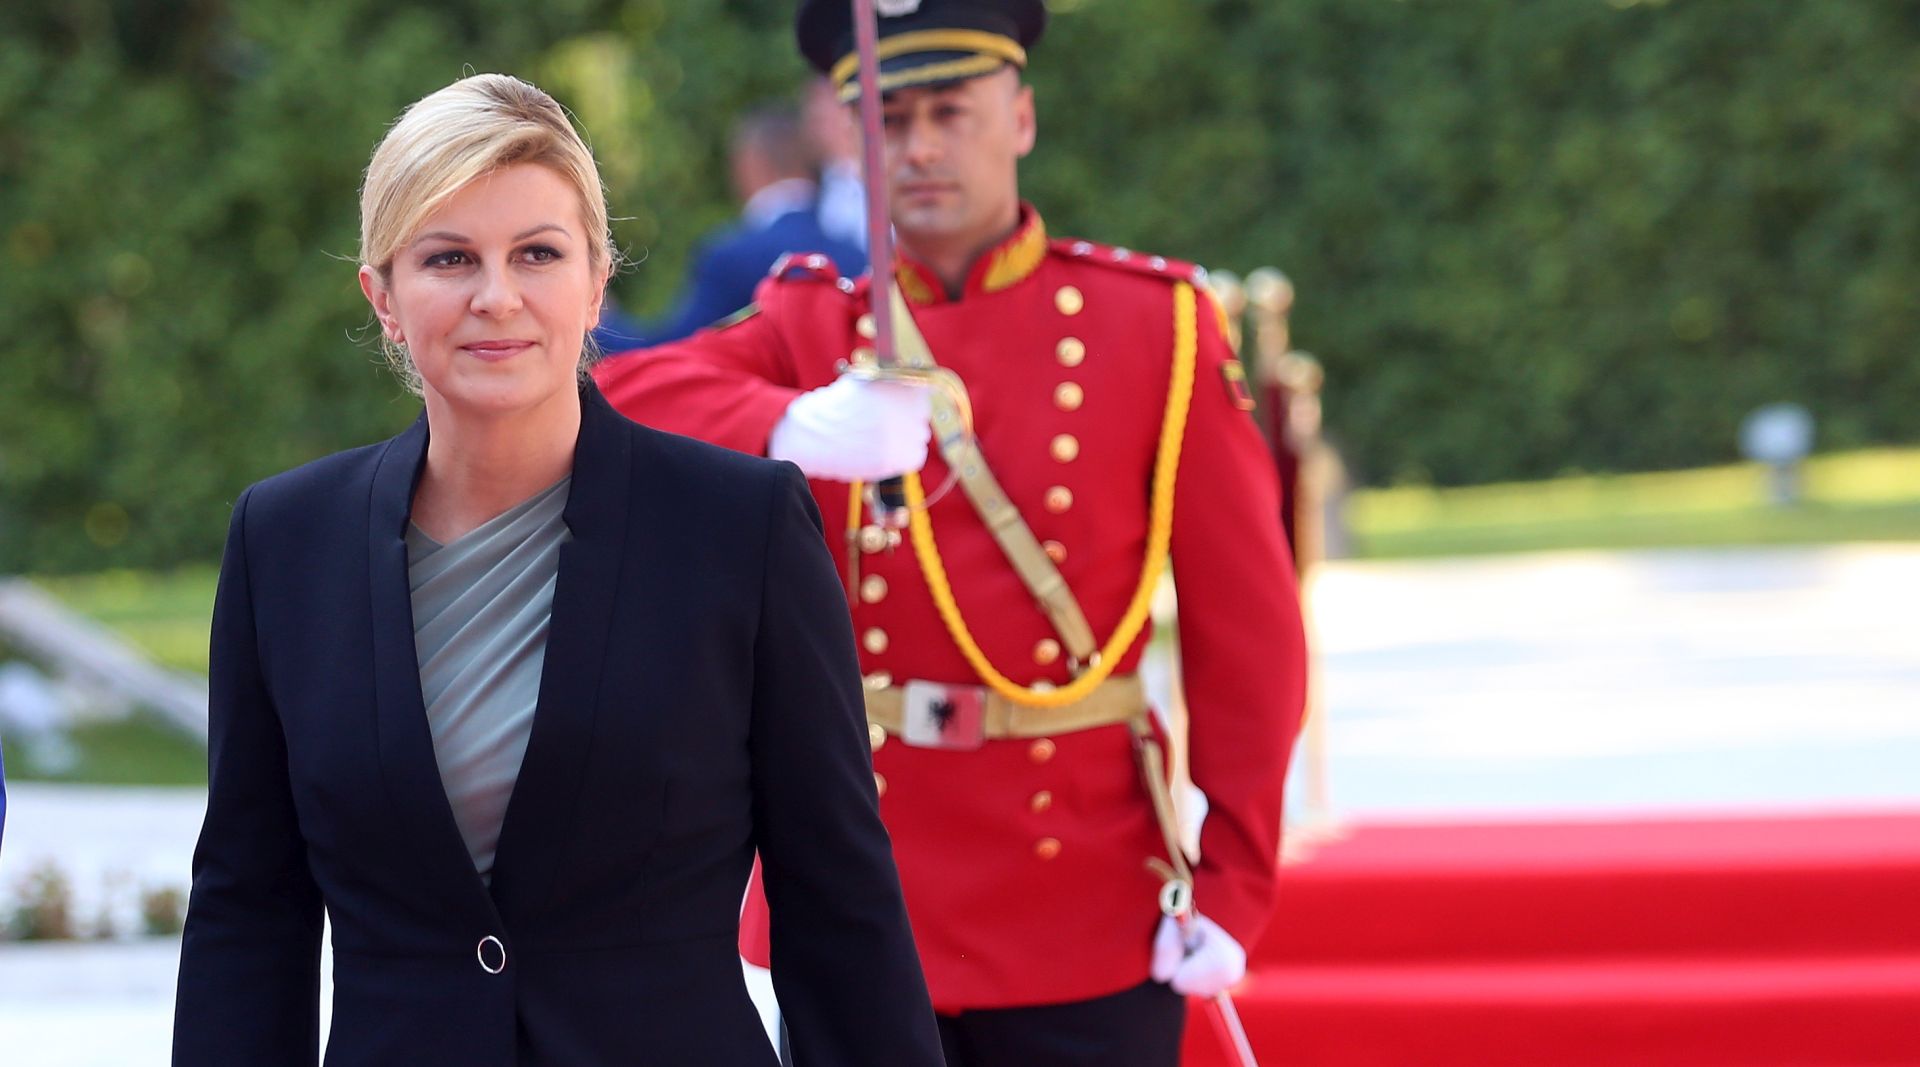 epa06896985 President of Republic of Croatia Kolinda Grabar-Kitarovic after a welcoming ceremony with her Albanian counterpart Ilir Meta (not in picture) in Tirana, Albania, on 18 July 2018. Kolinda Grabar-Kitarovic arrived in Albania for a three-day official visit.  EPA/MALTON DIBRA